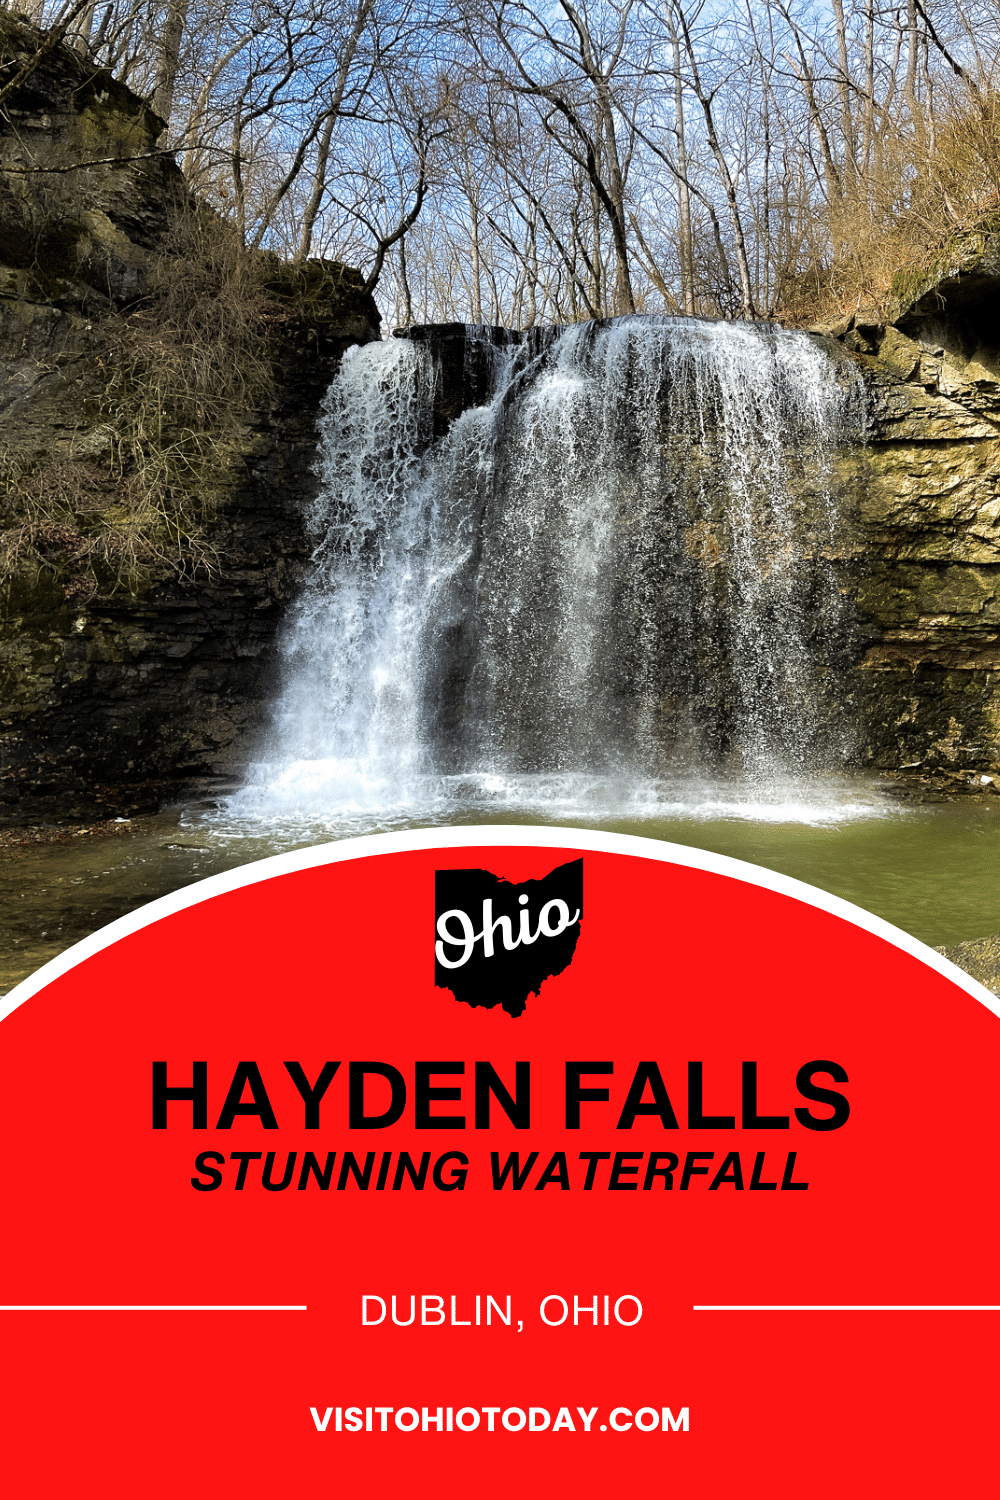 vertical image with a photo of Hayden Falls waterfall. A red area at the bottom contains the text Hayden Falls Stunning Waterfall Dublin Ohio